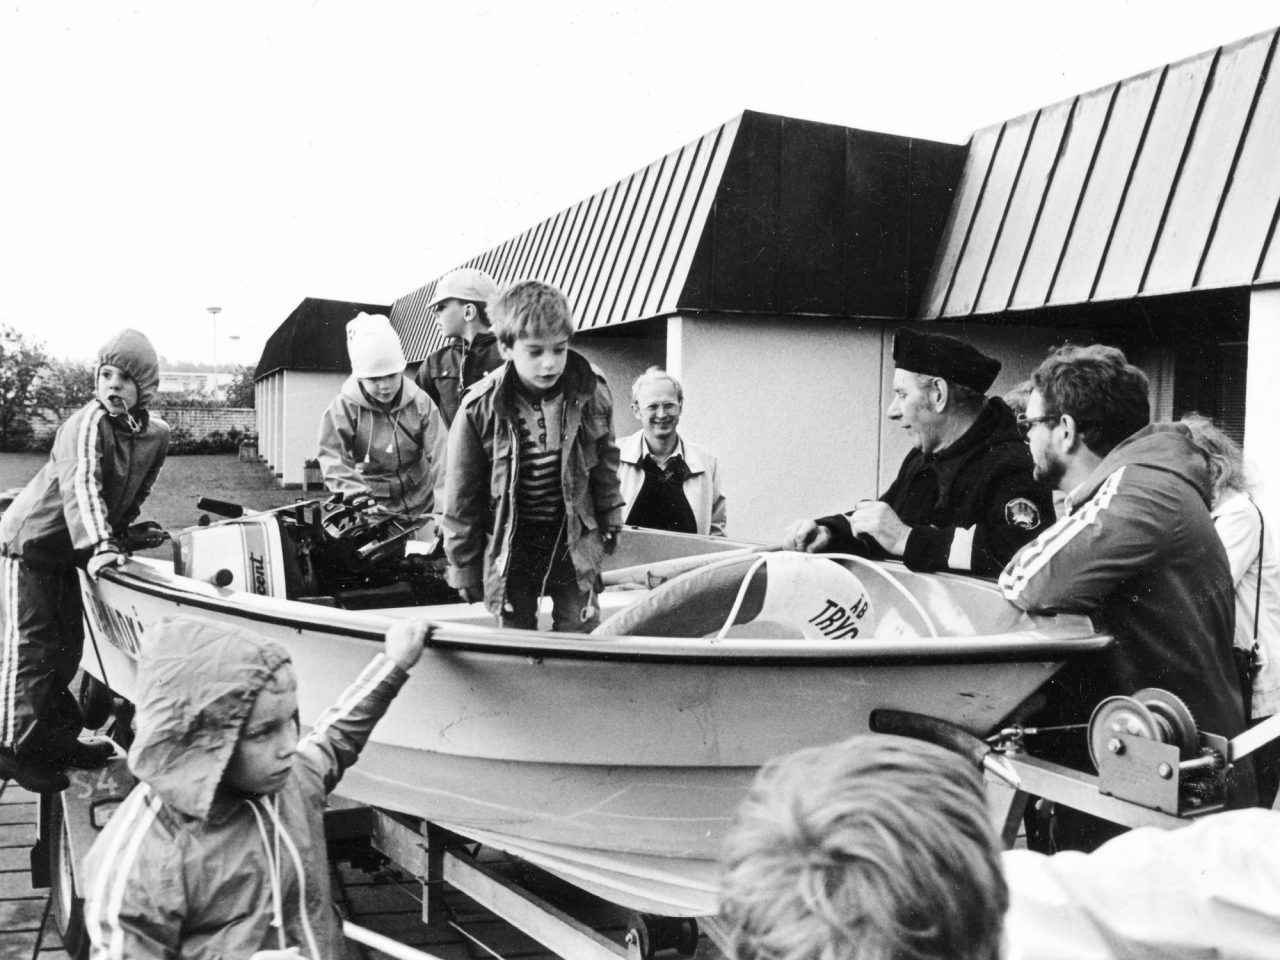 Children play in a boat set up on land, a policeman stands next to the boat talking to the children.